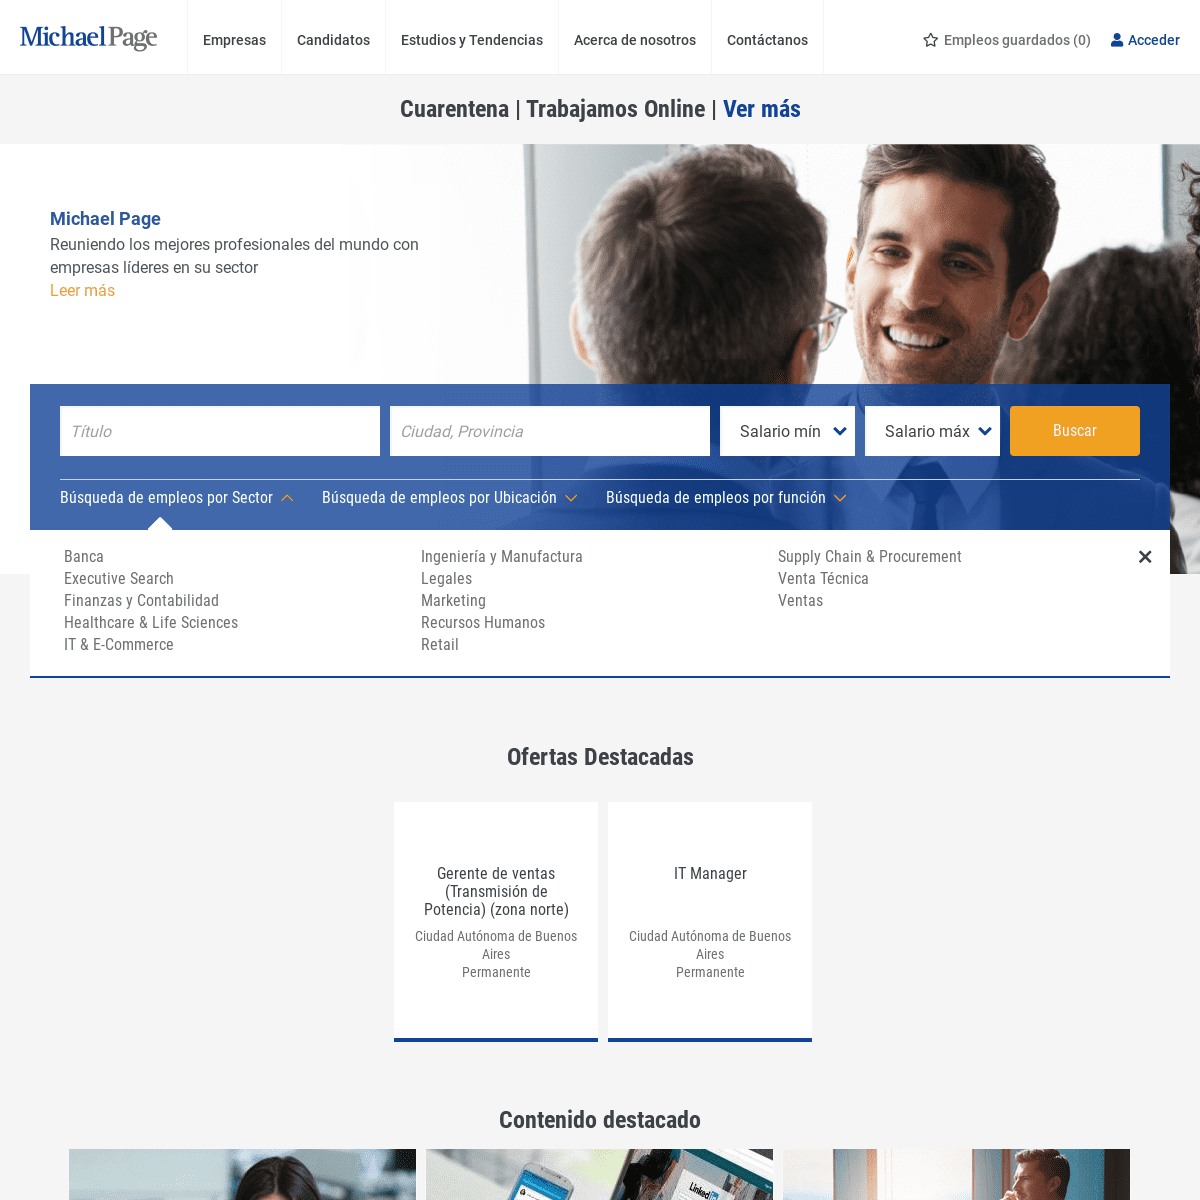 A complete backup of michaelpage.com.ar